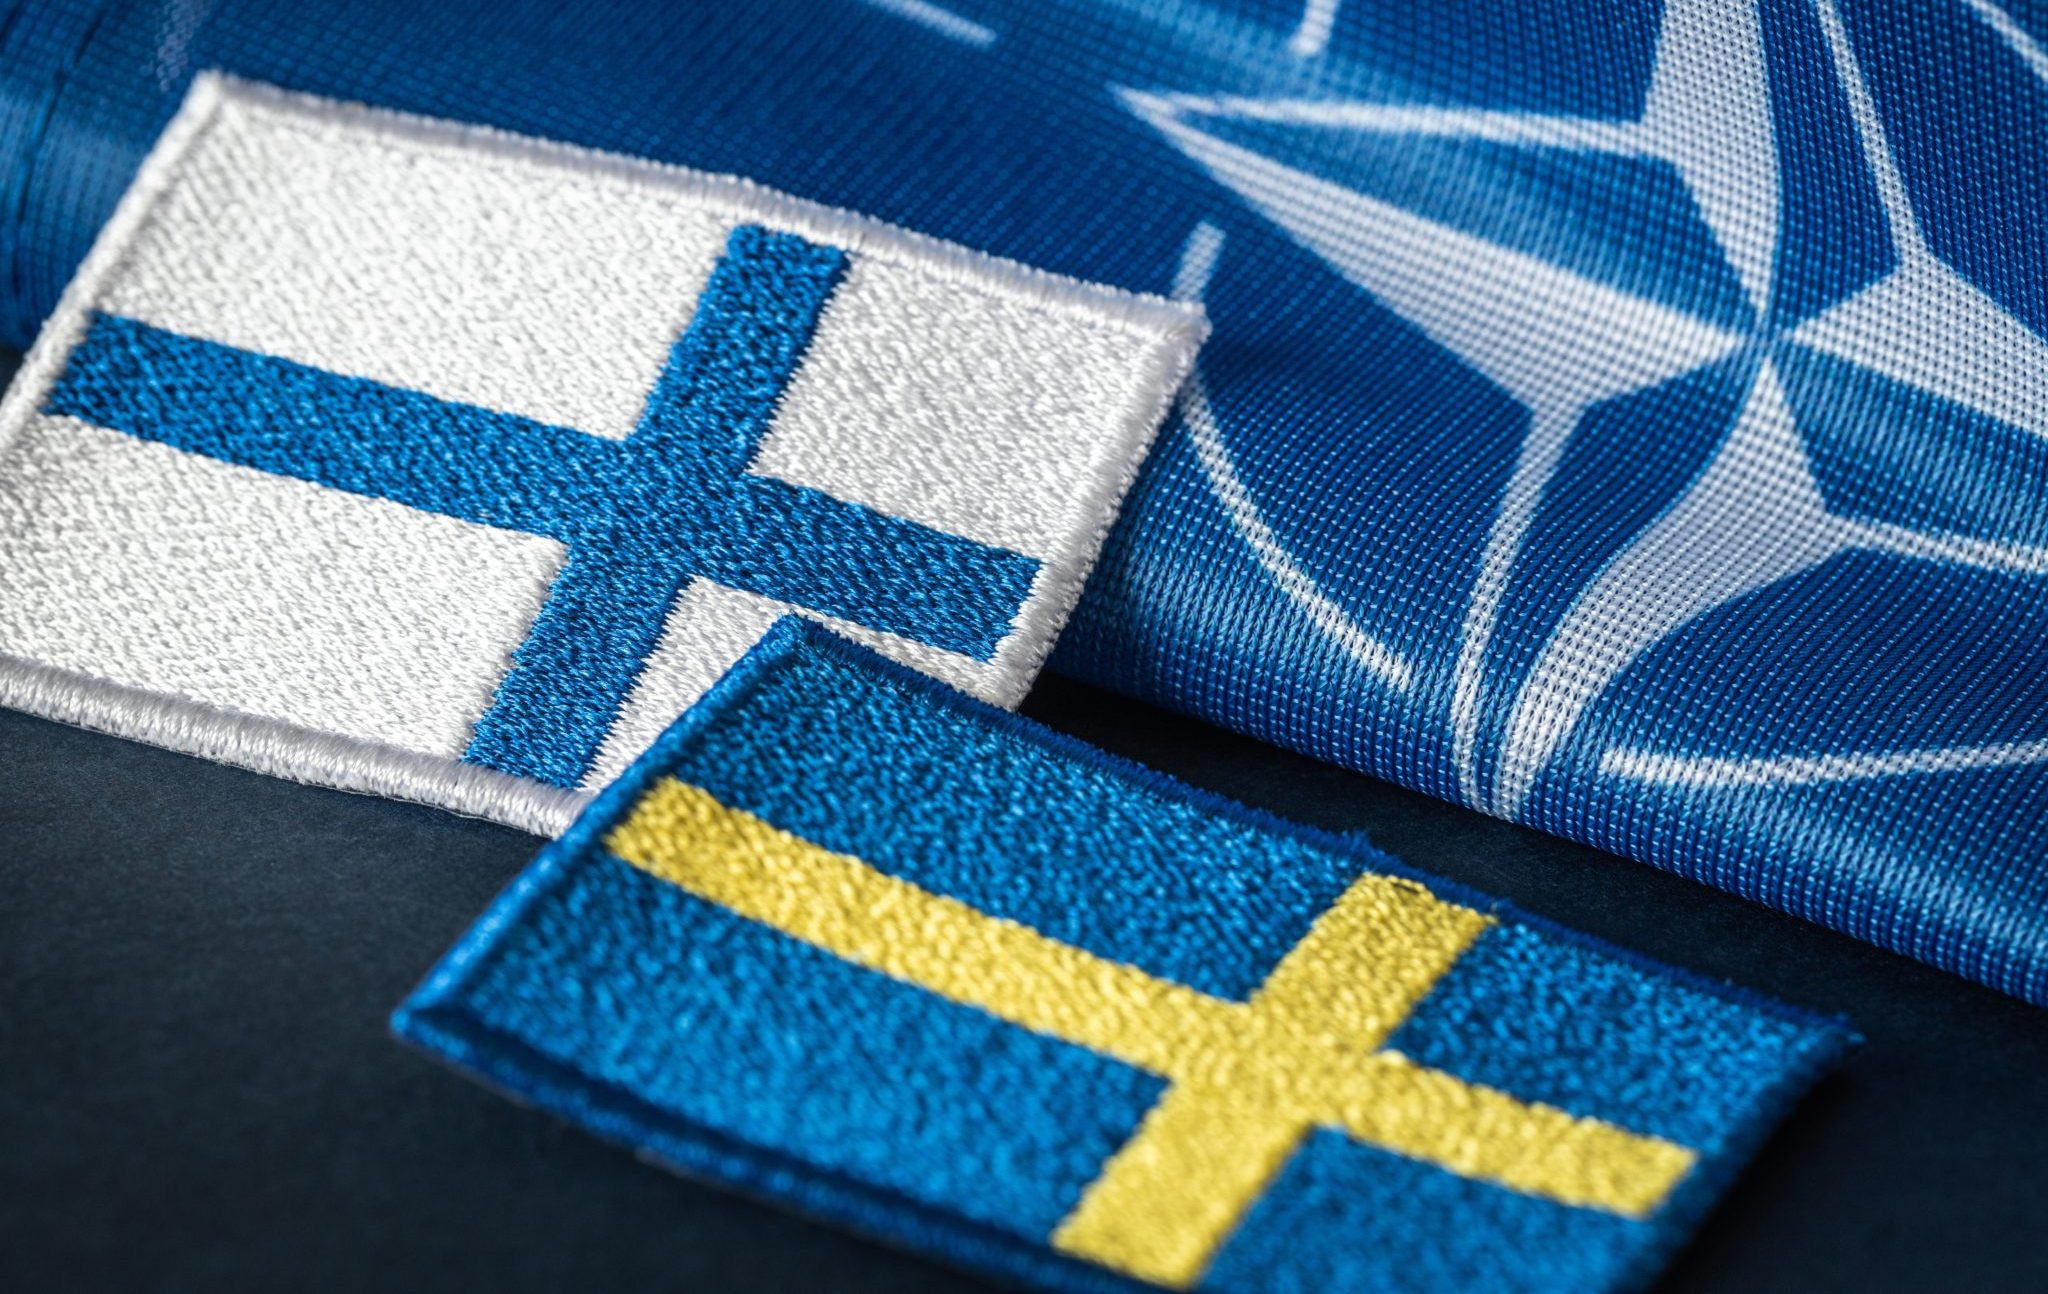 Sweden and Finland in NATO: What’s in it for Us?